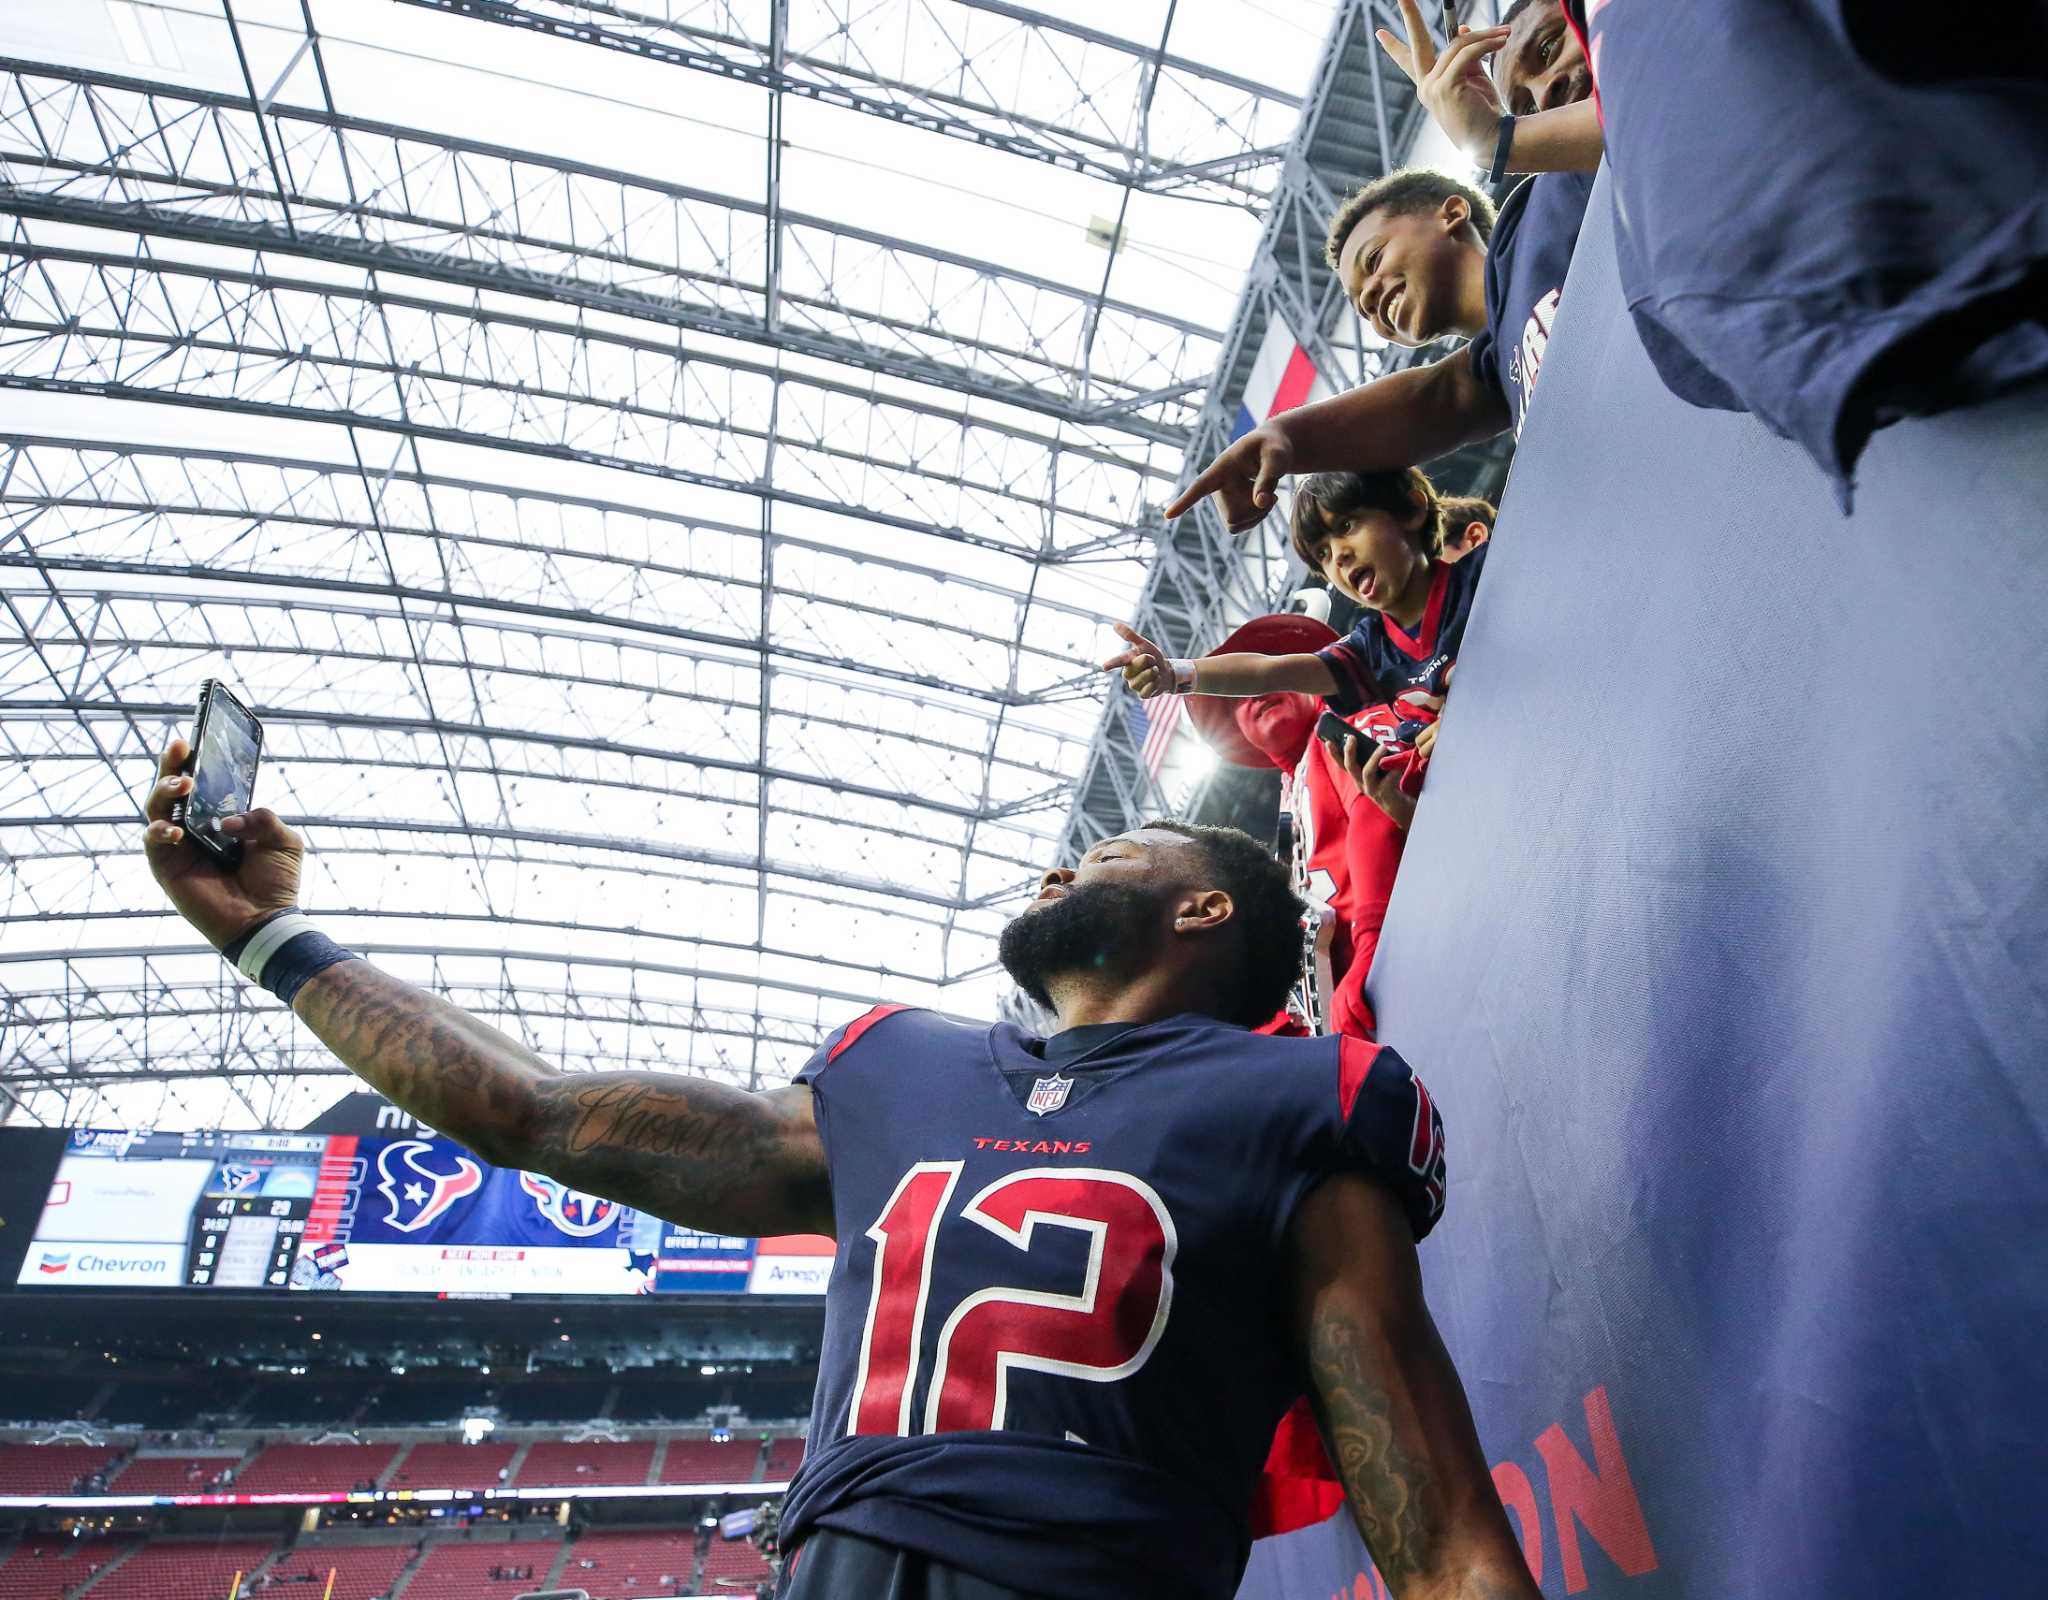 Opinion: Open the NRG Stadium roof and reduce COVID spread at